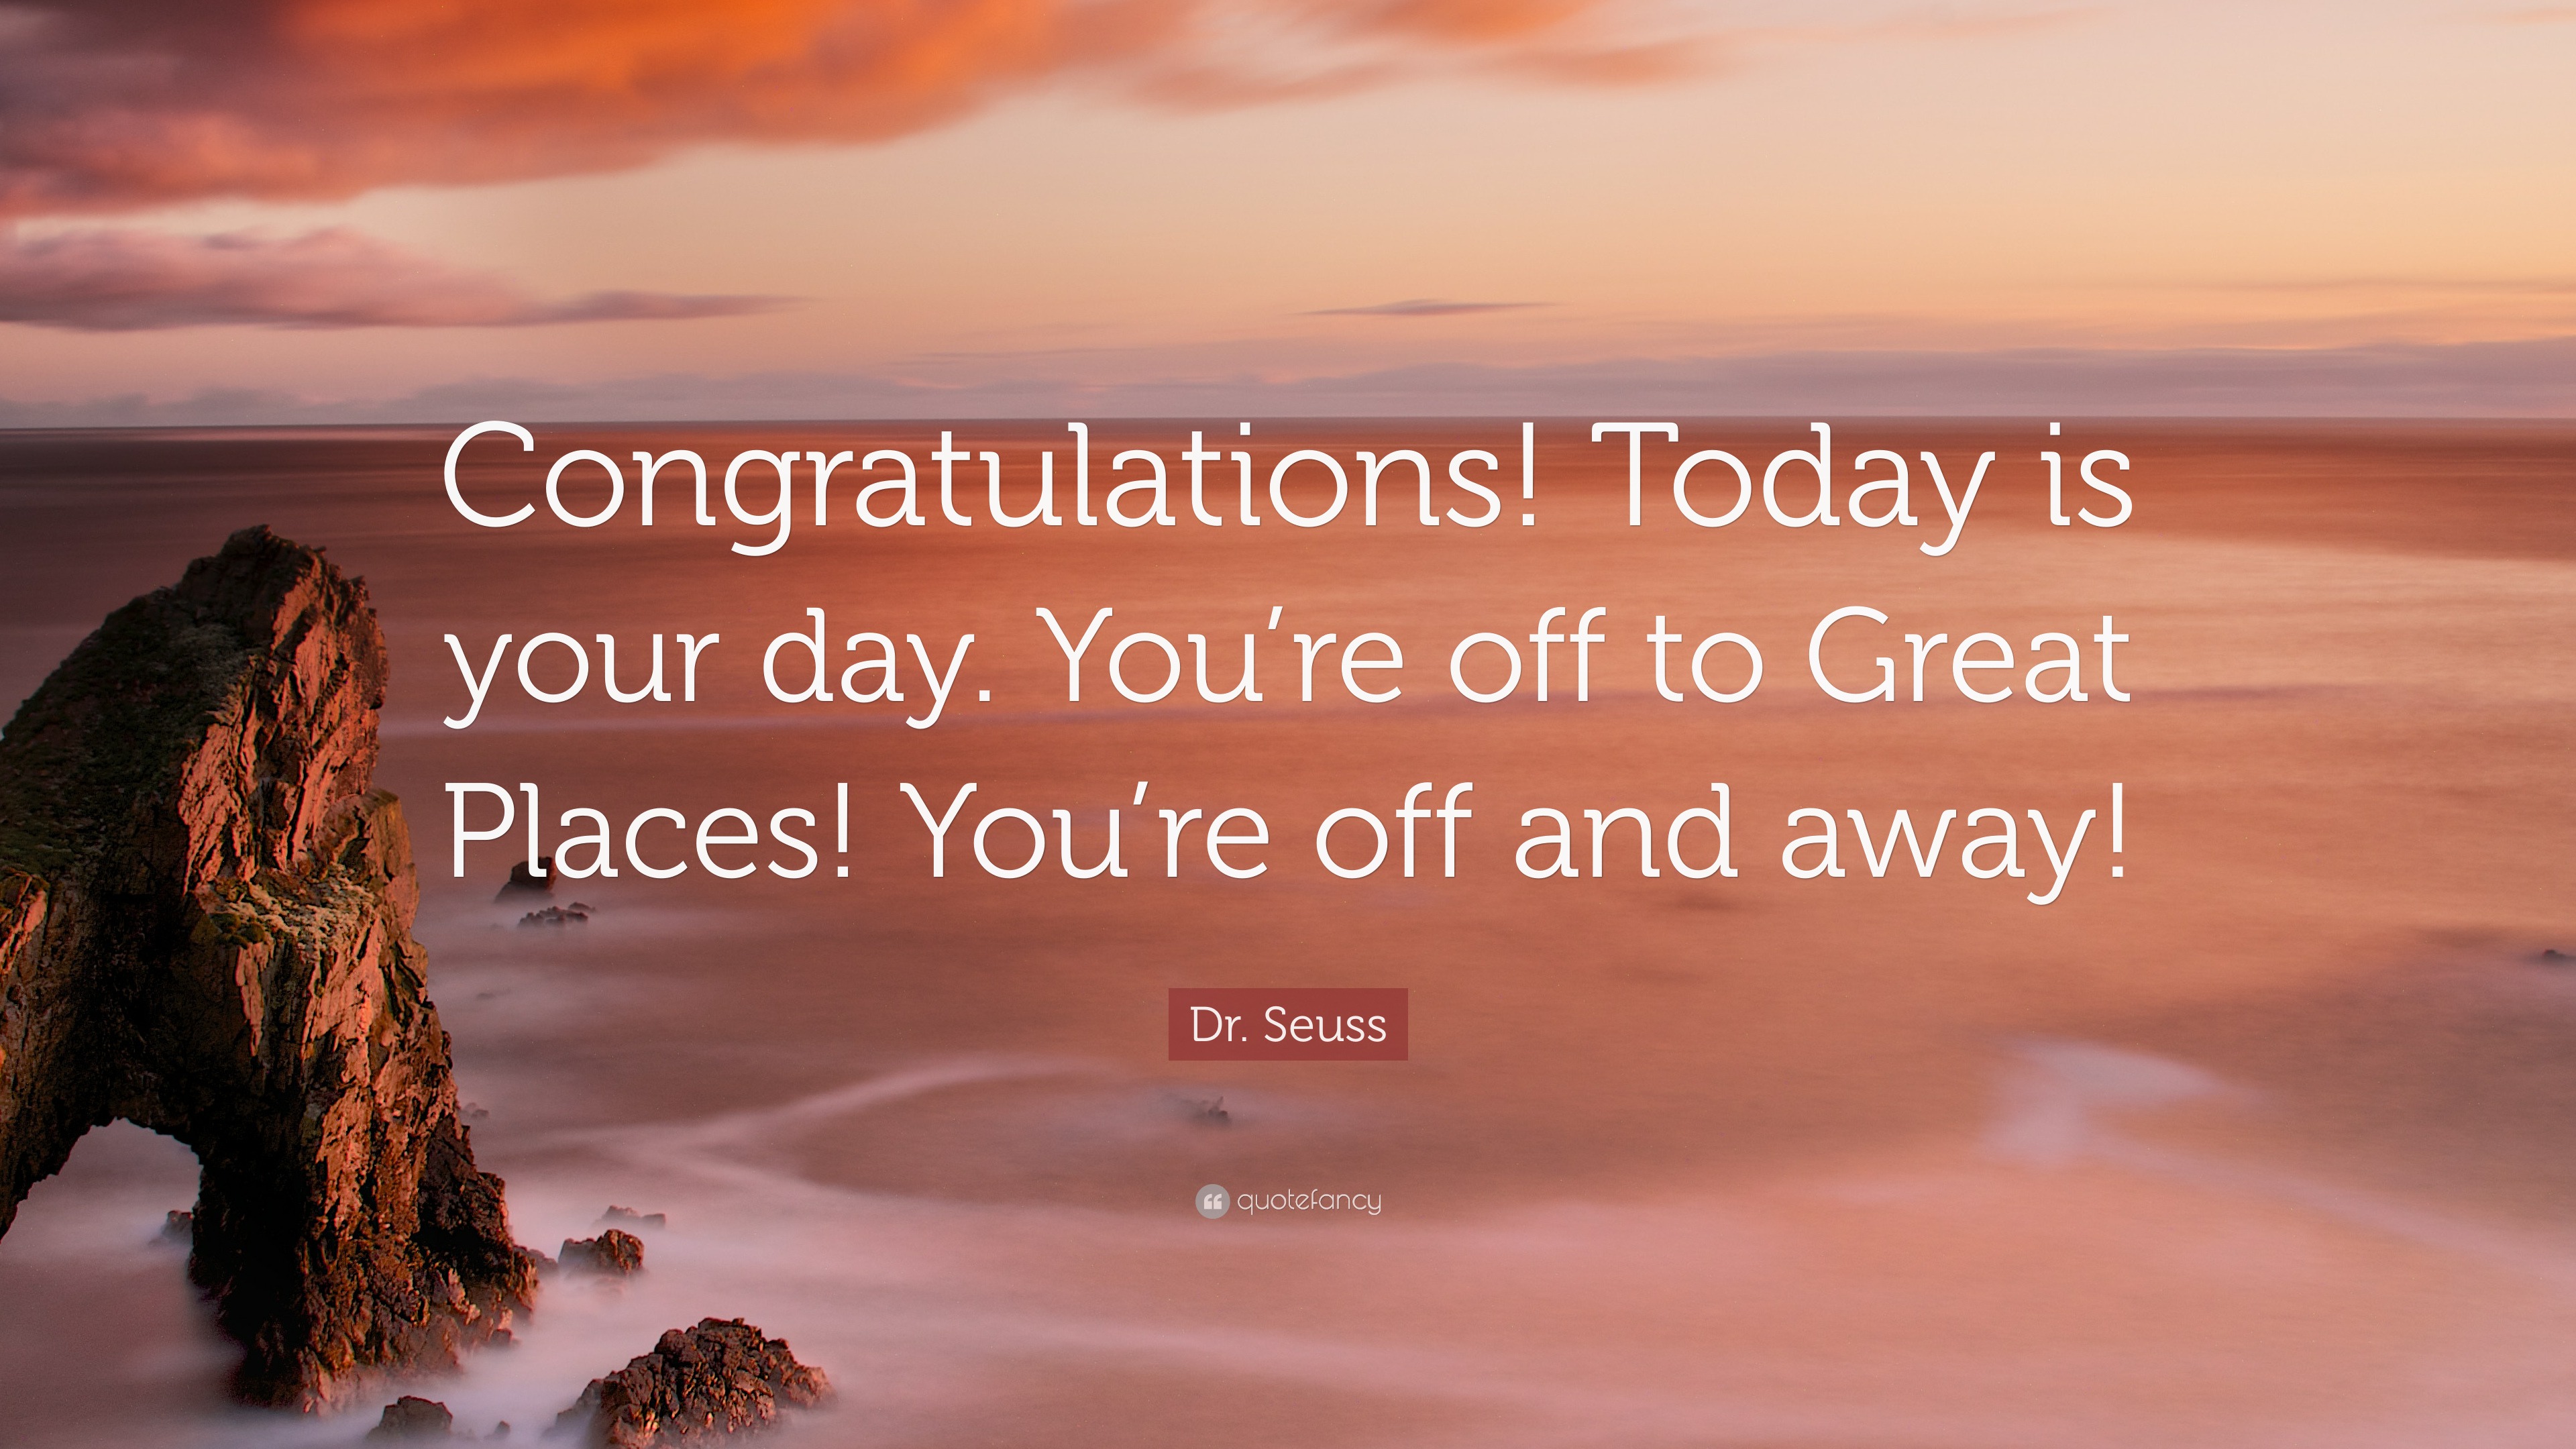 dr-seuss-quote-congratulations-today-is-your-day-you-re-off-to